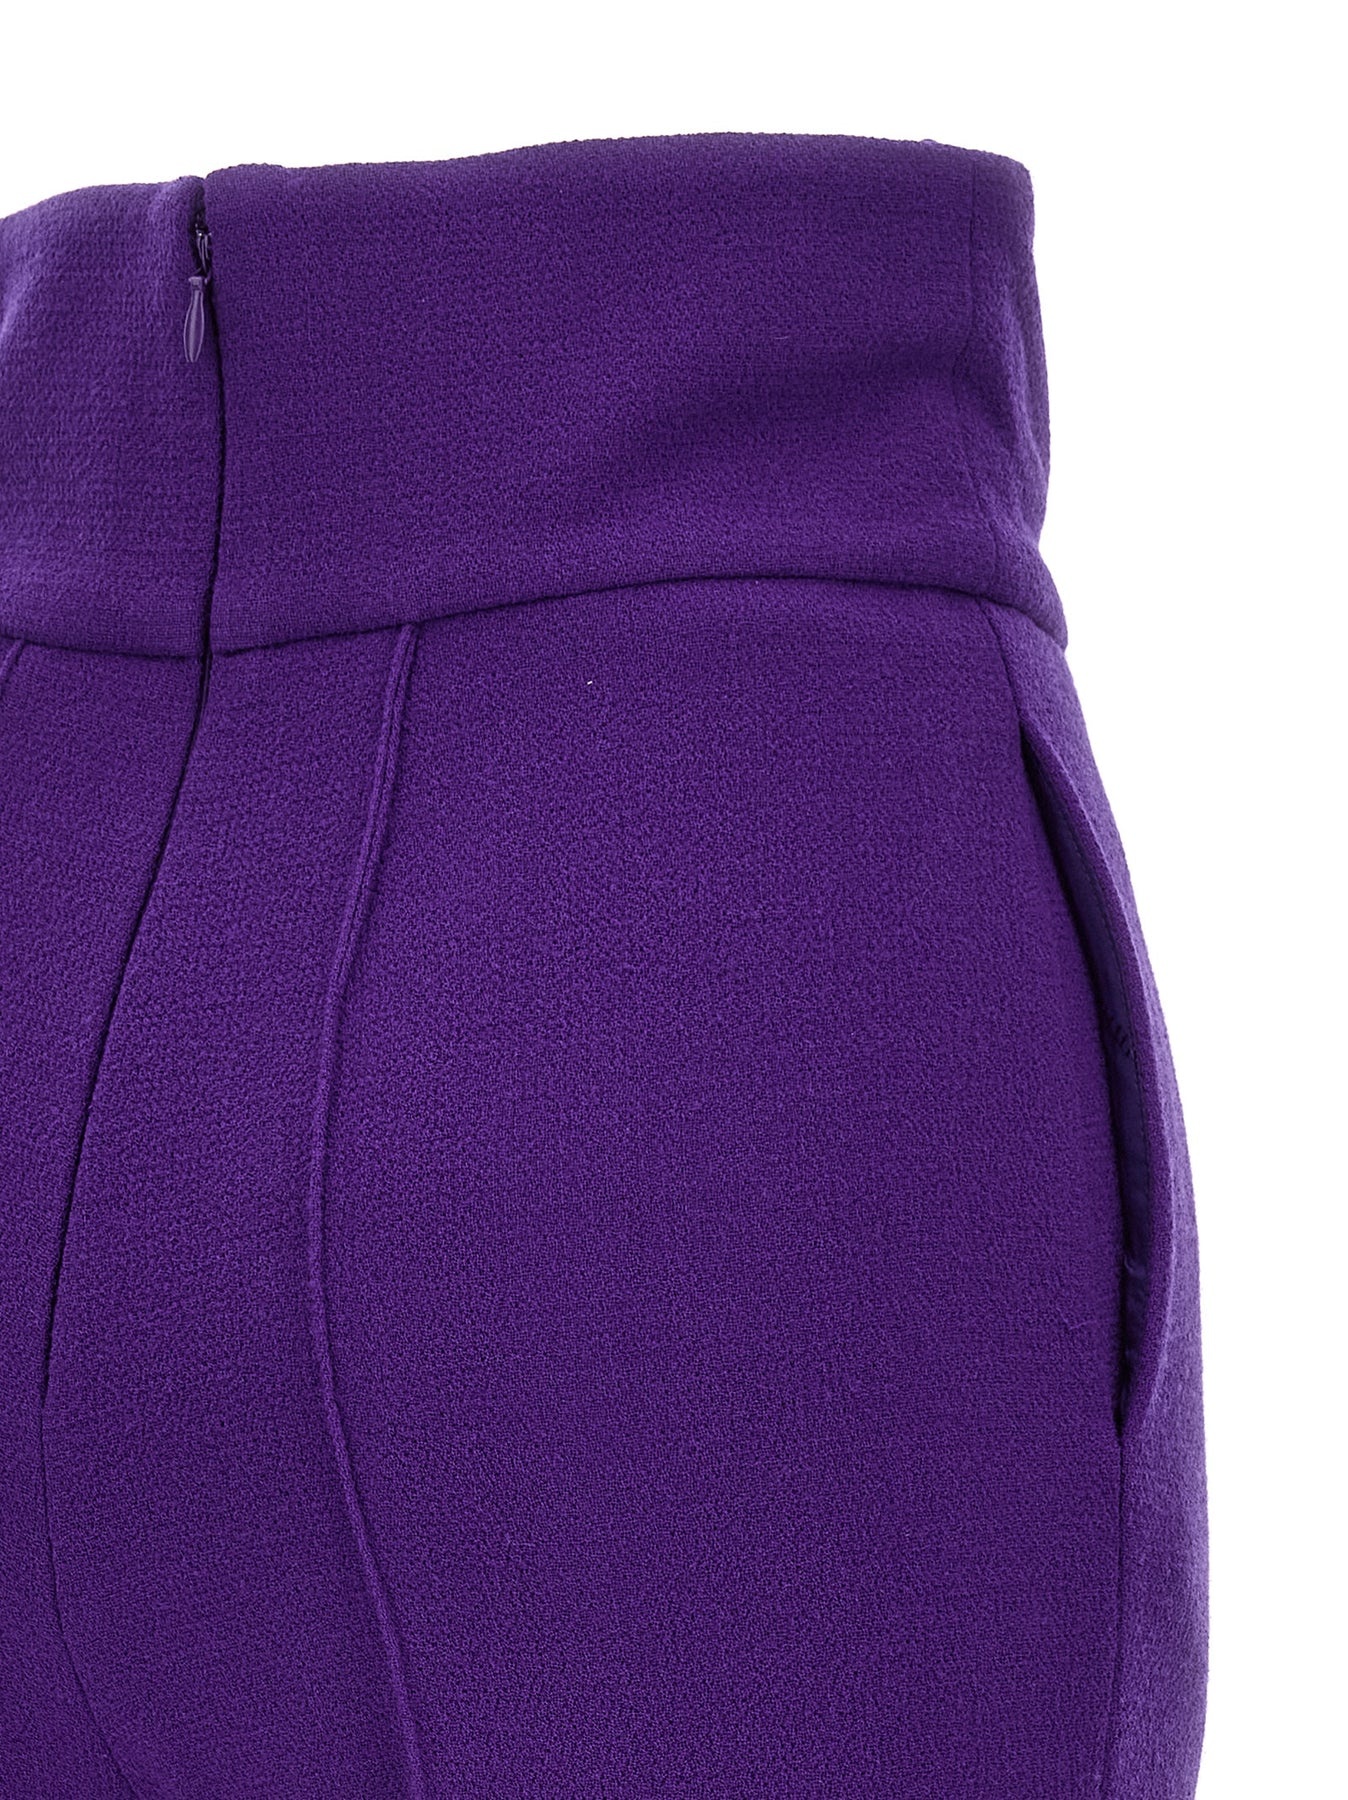 Tailored Trousers Pants Purple - 4